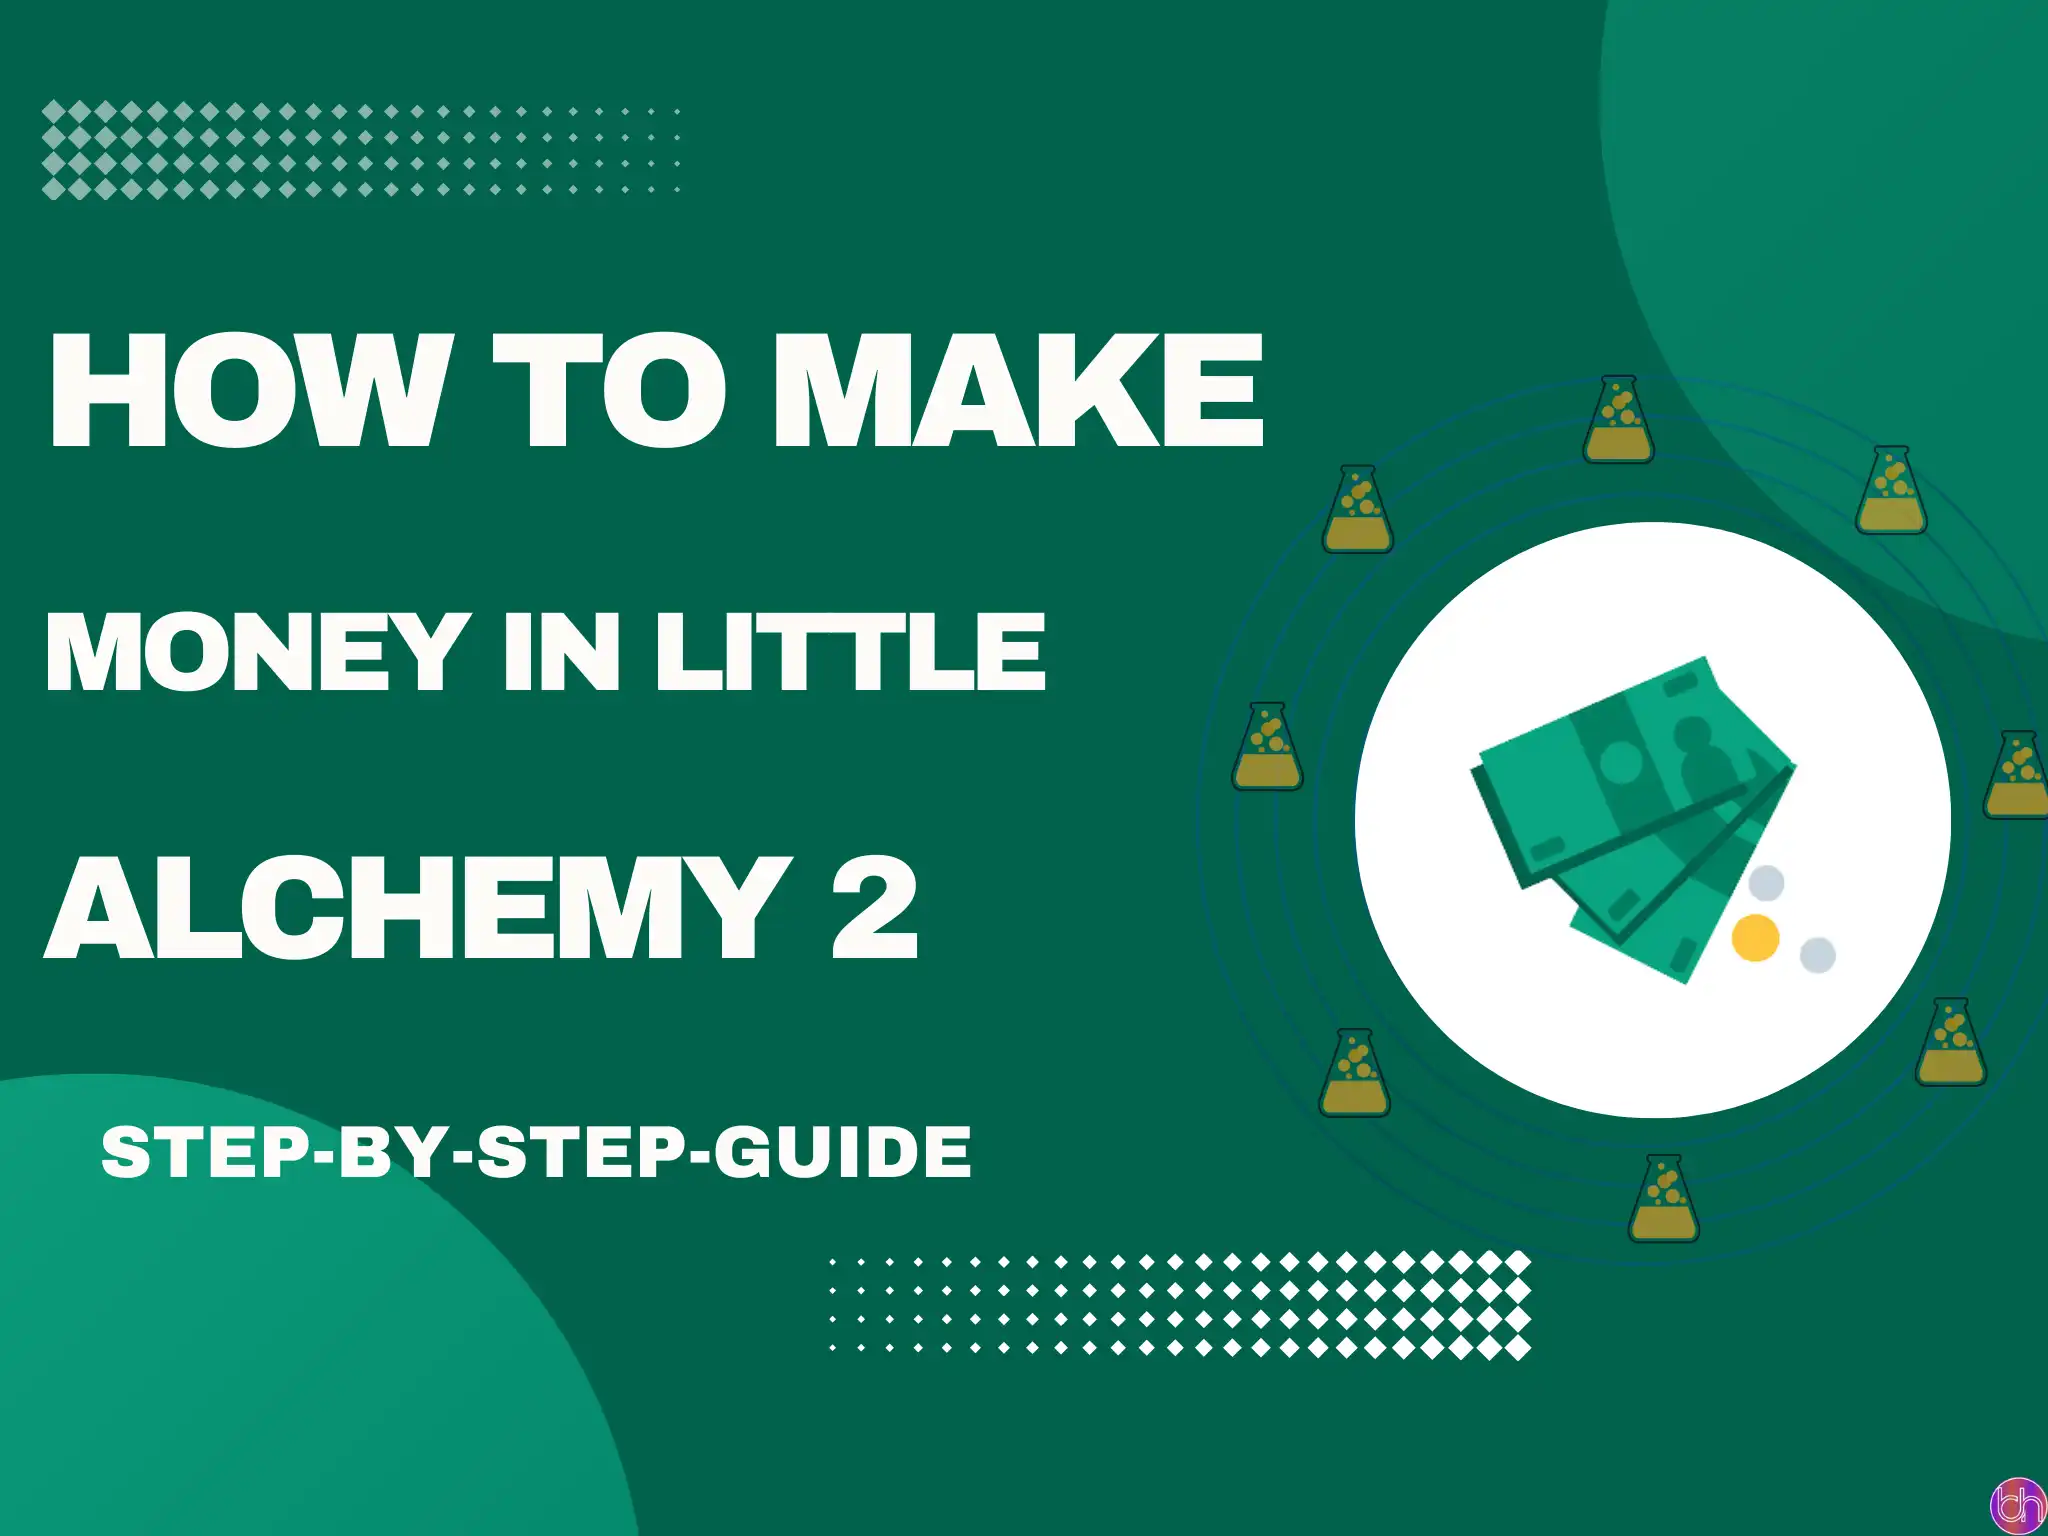 How to make Money in Little Alchemy 2